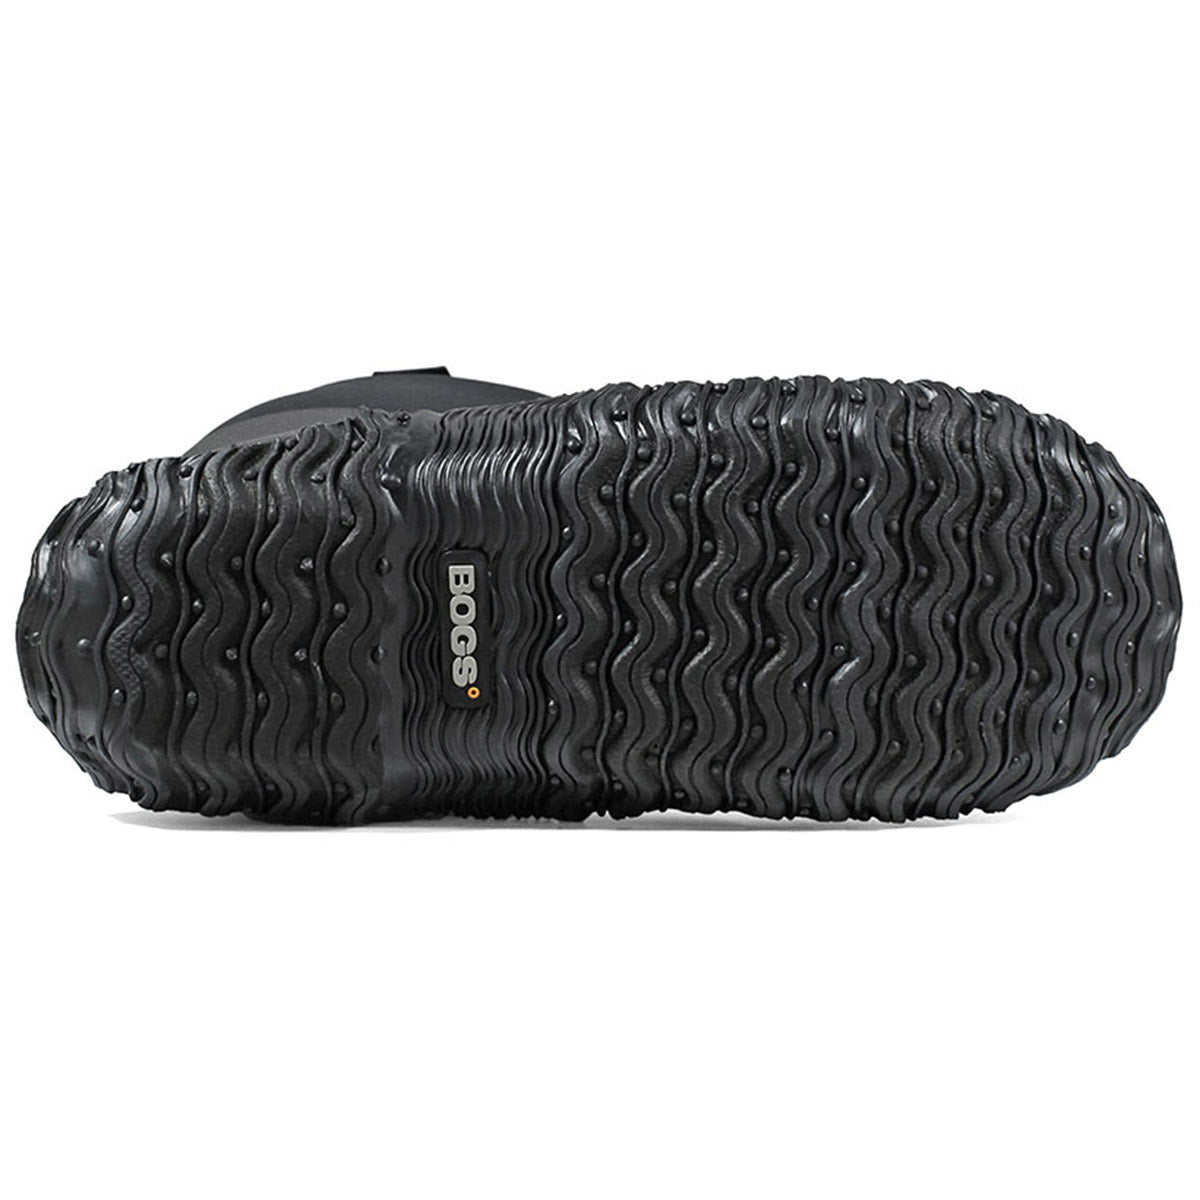 Sole of a Bogs Classic Tall Black boot showing tread pattern.